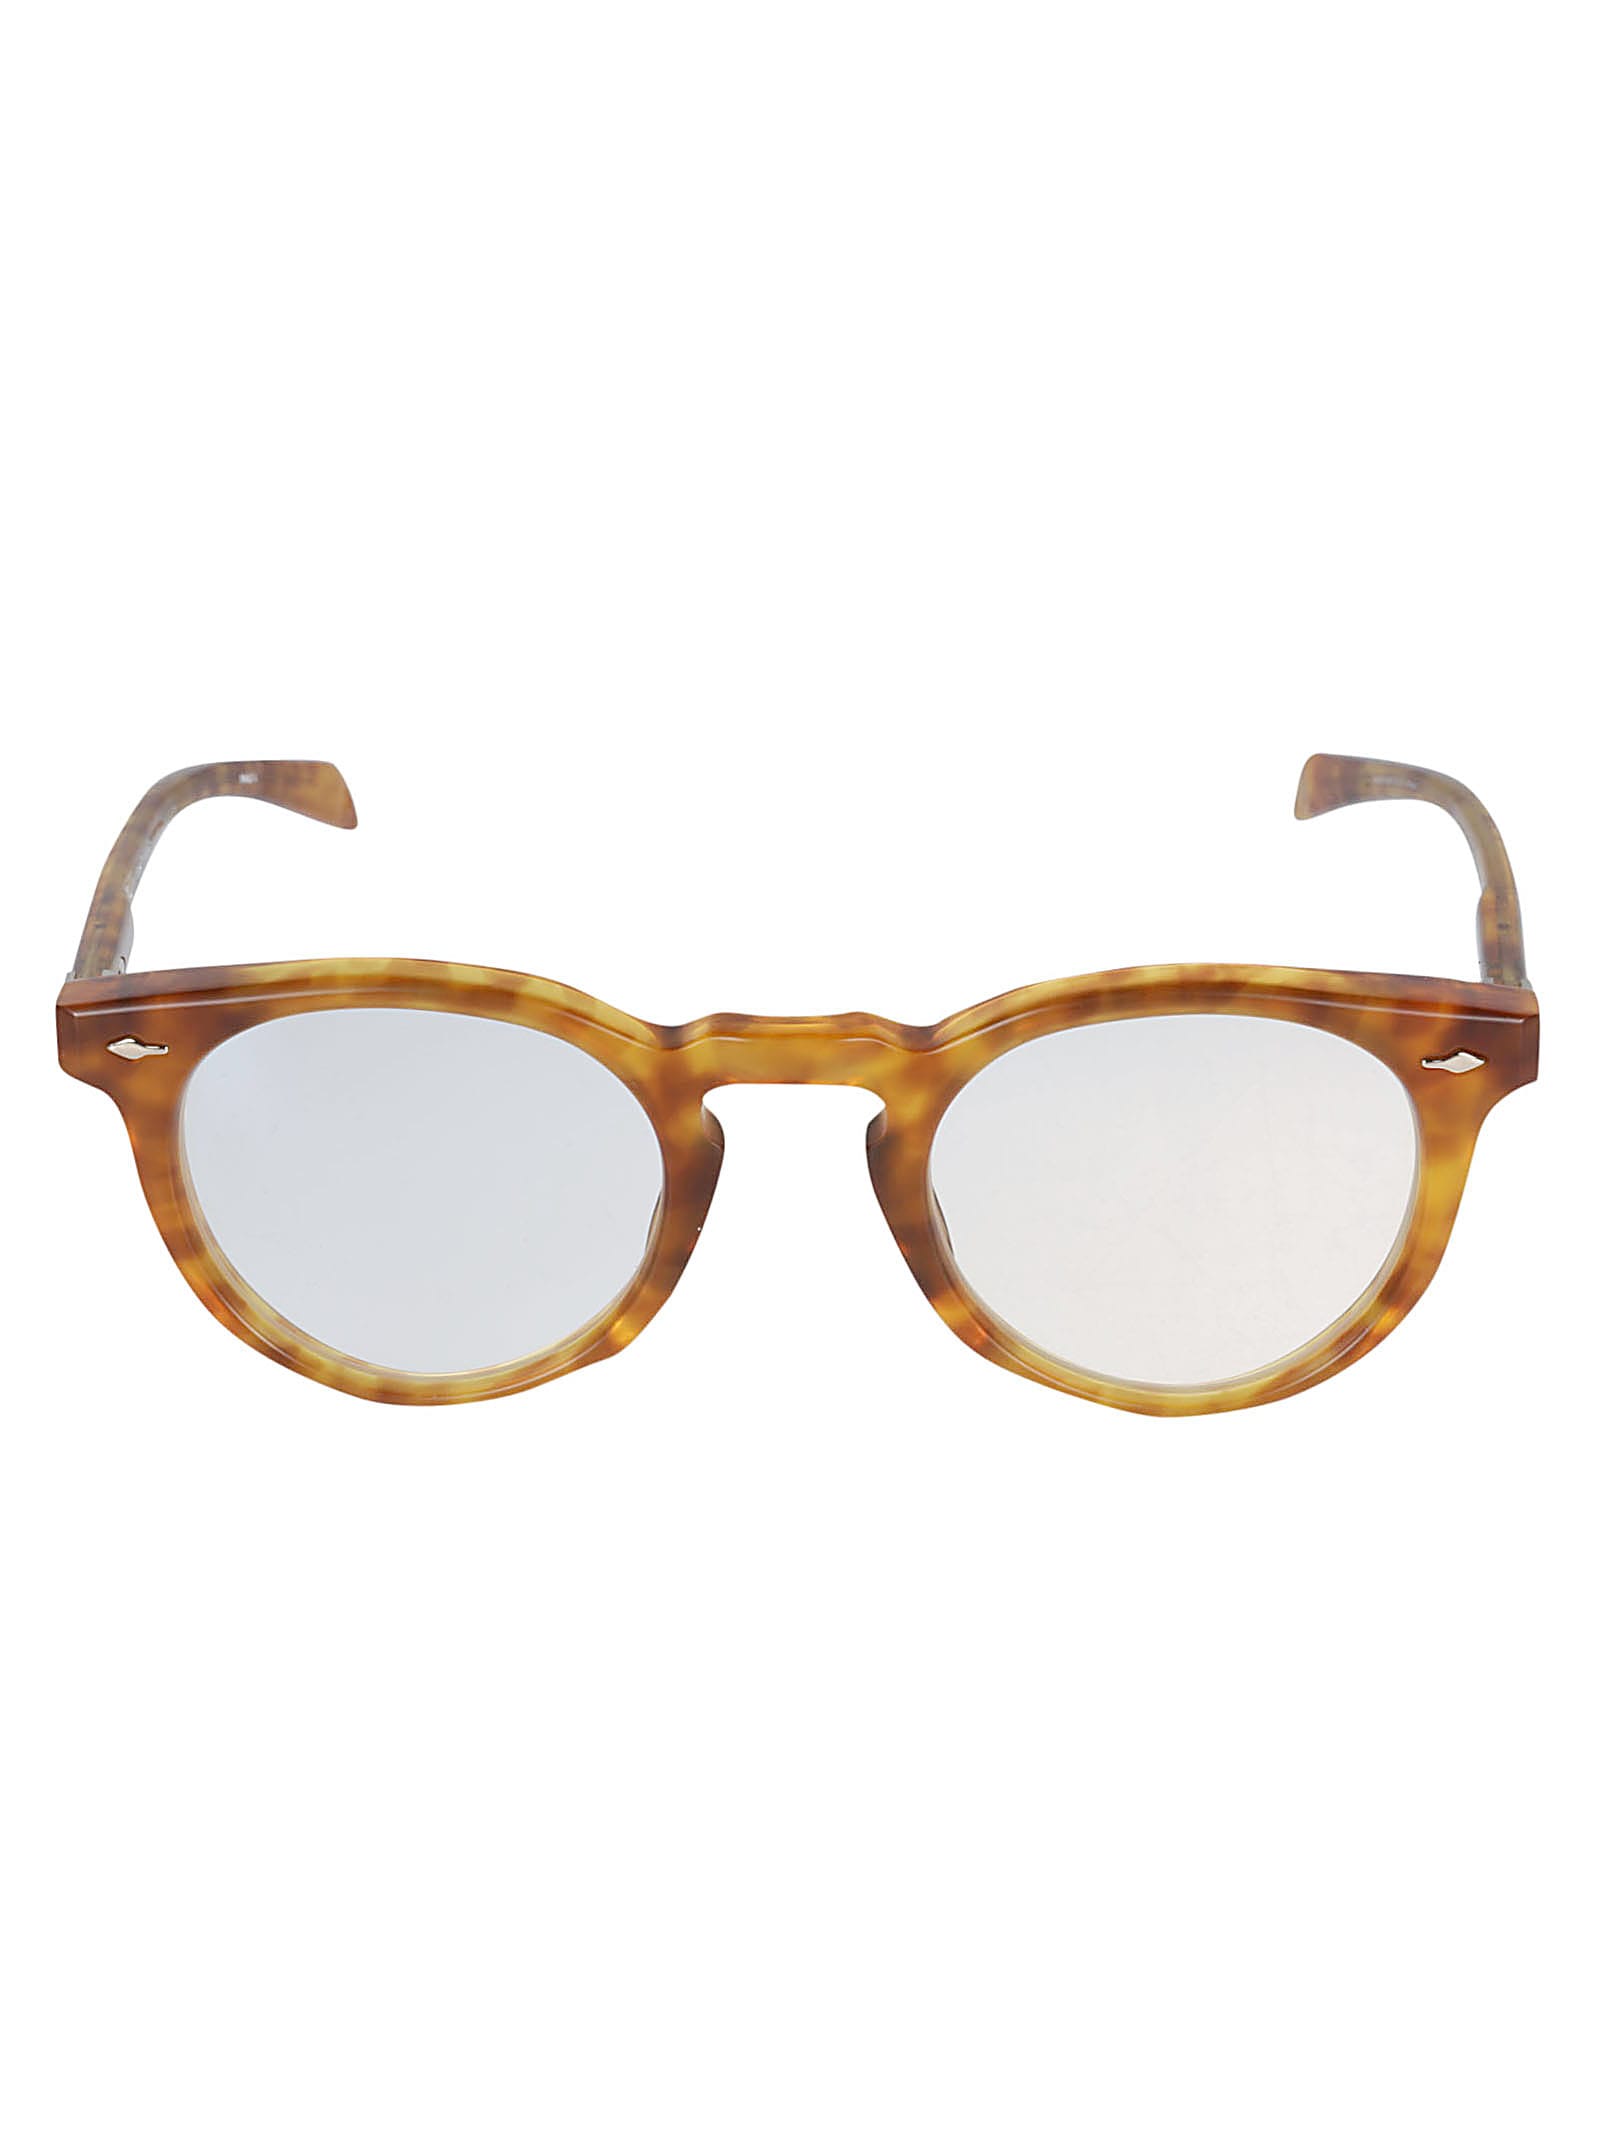 Jacques Marie Mage Fumio Round Glasses In Camel